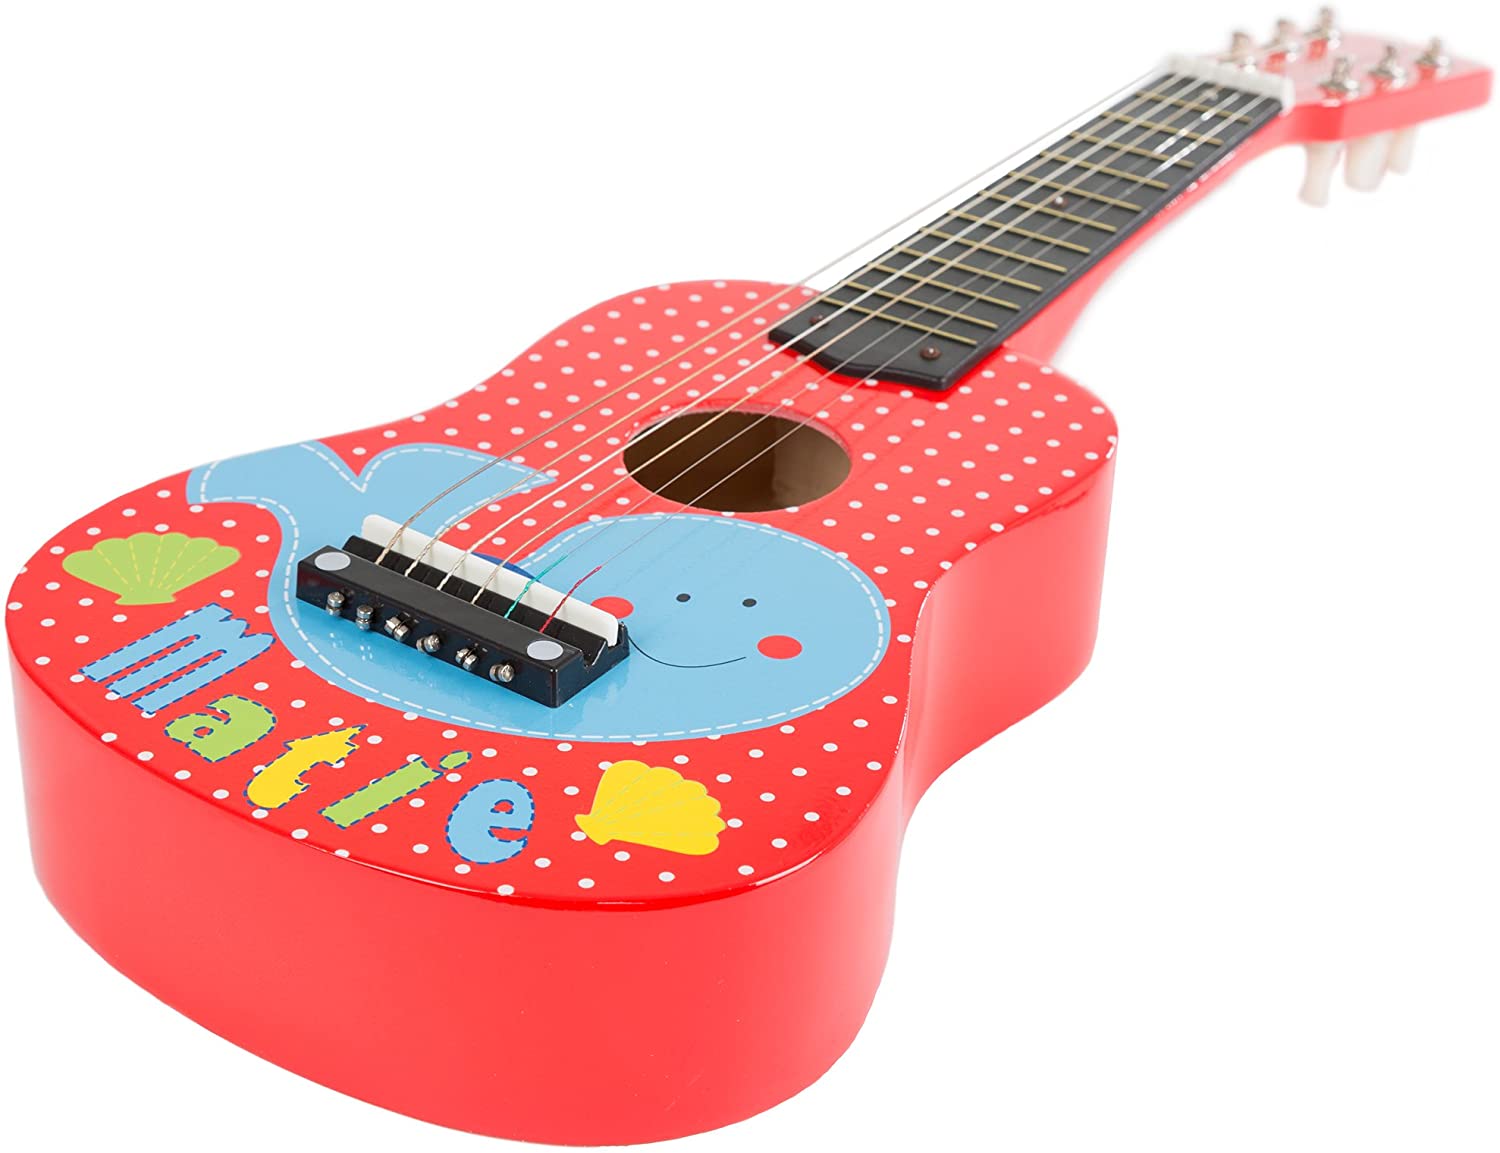 Acoustic Music Learning Toy